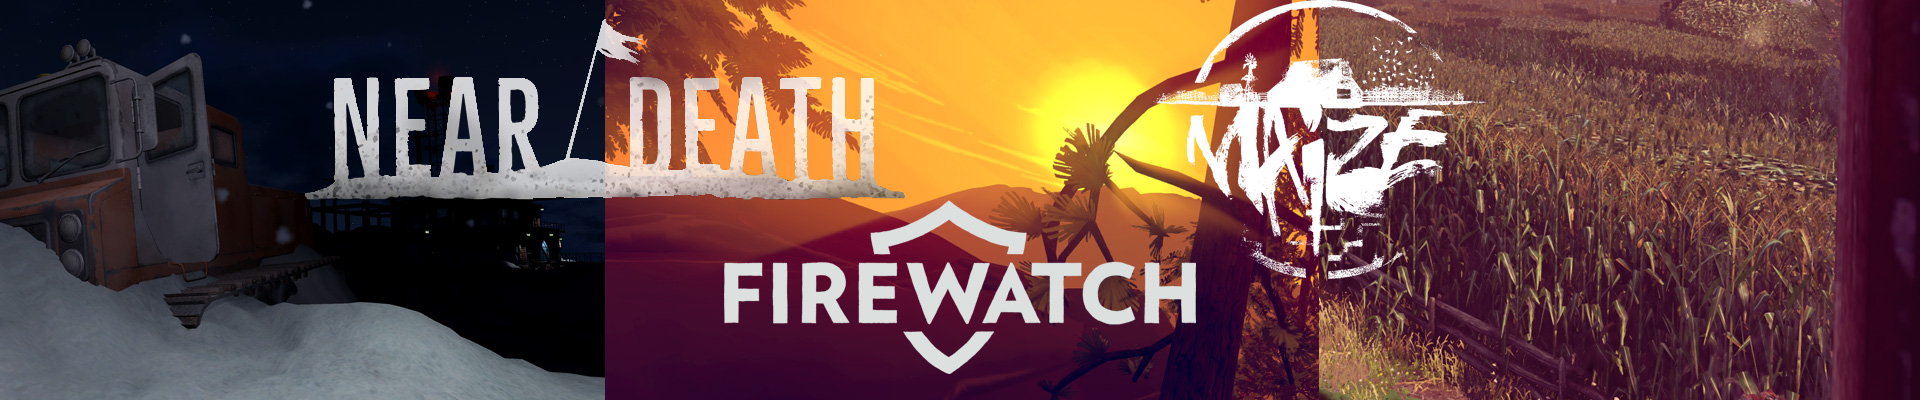 Thoughts on: Near Death, Firewatch and Maize